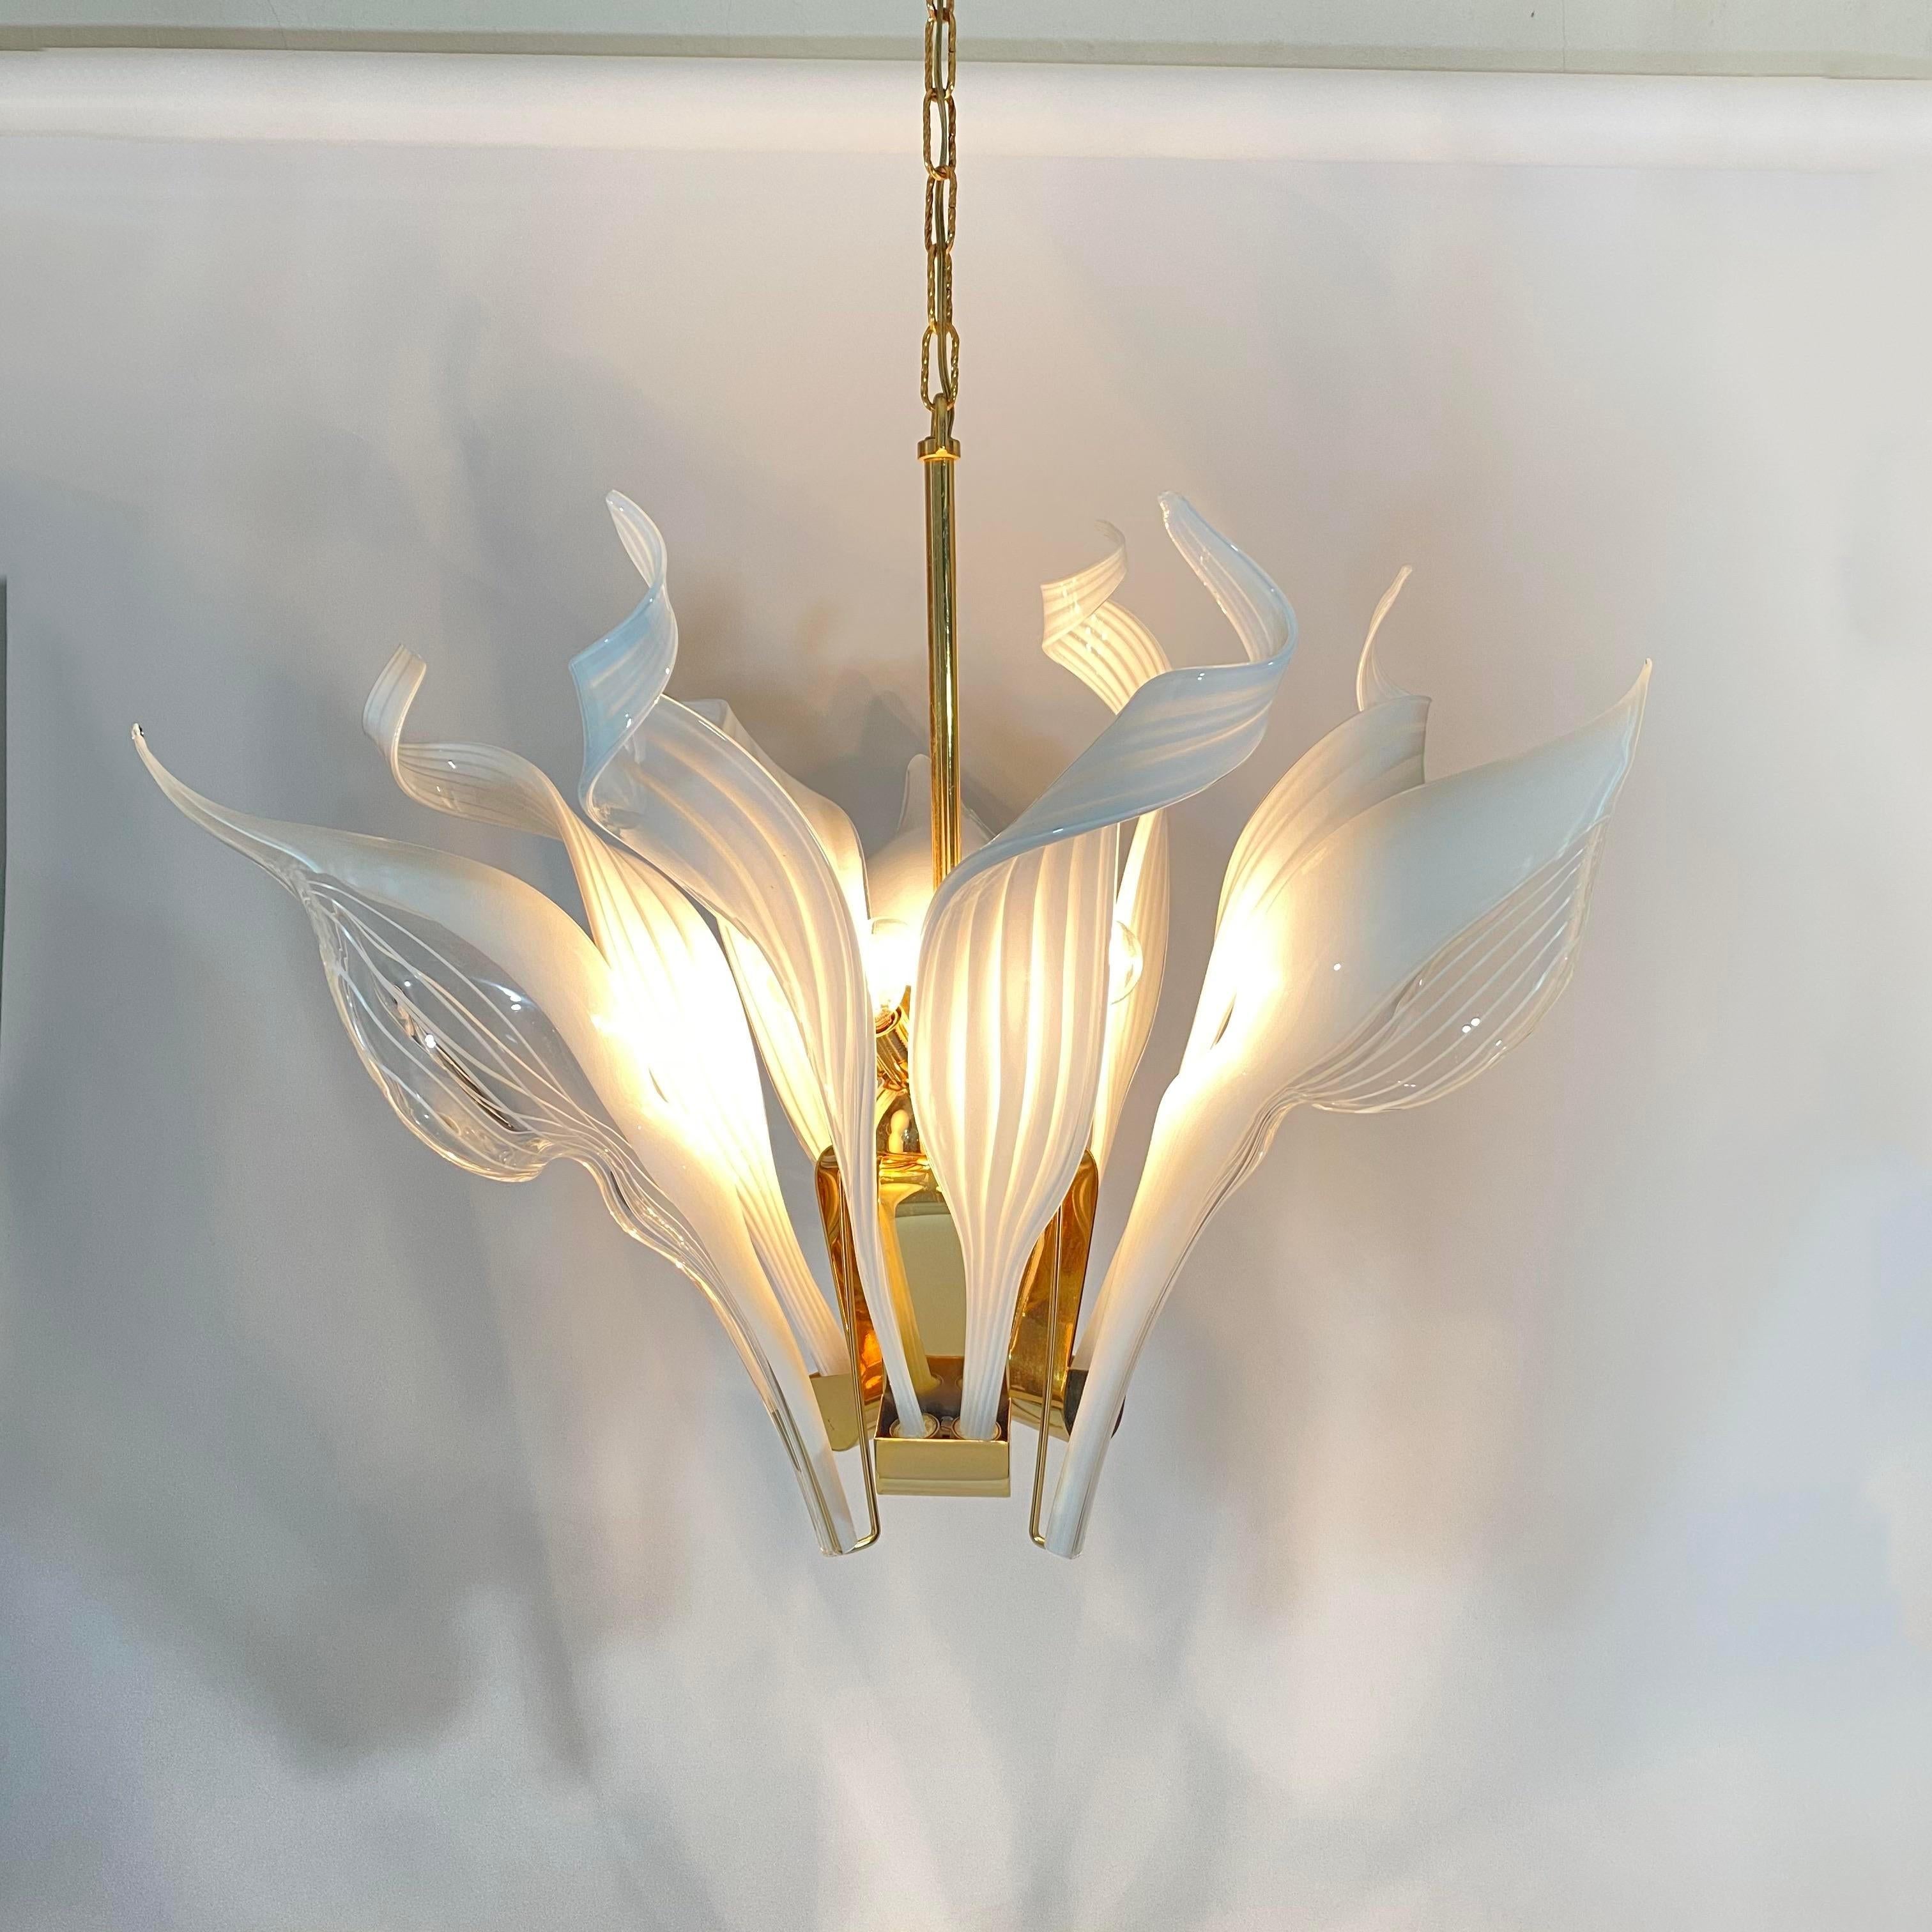 Circa 1970s Franco Luce Murano Glass calla lily and ribbon brass chandelier. 3 oversized calla lily hand blown flowers and 6 striped hand forged ribbons with stripe detail. Excellent vintage condition and a true statement piece. Chandelier is